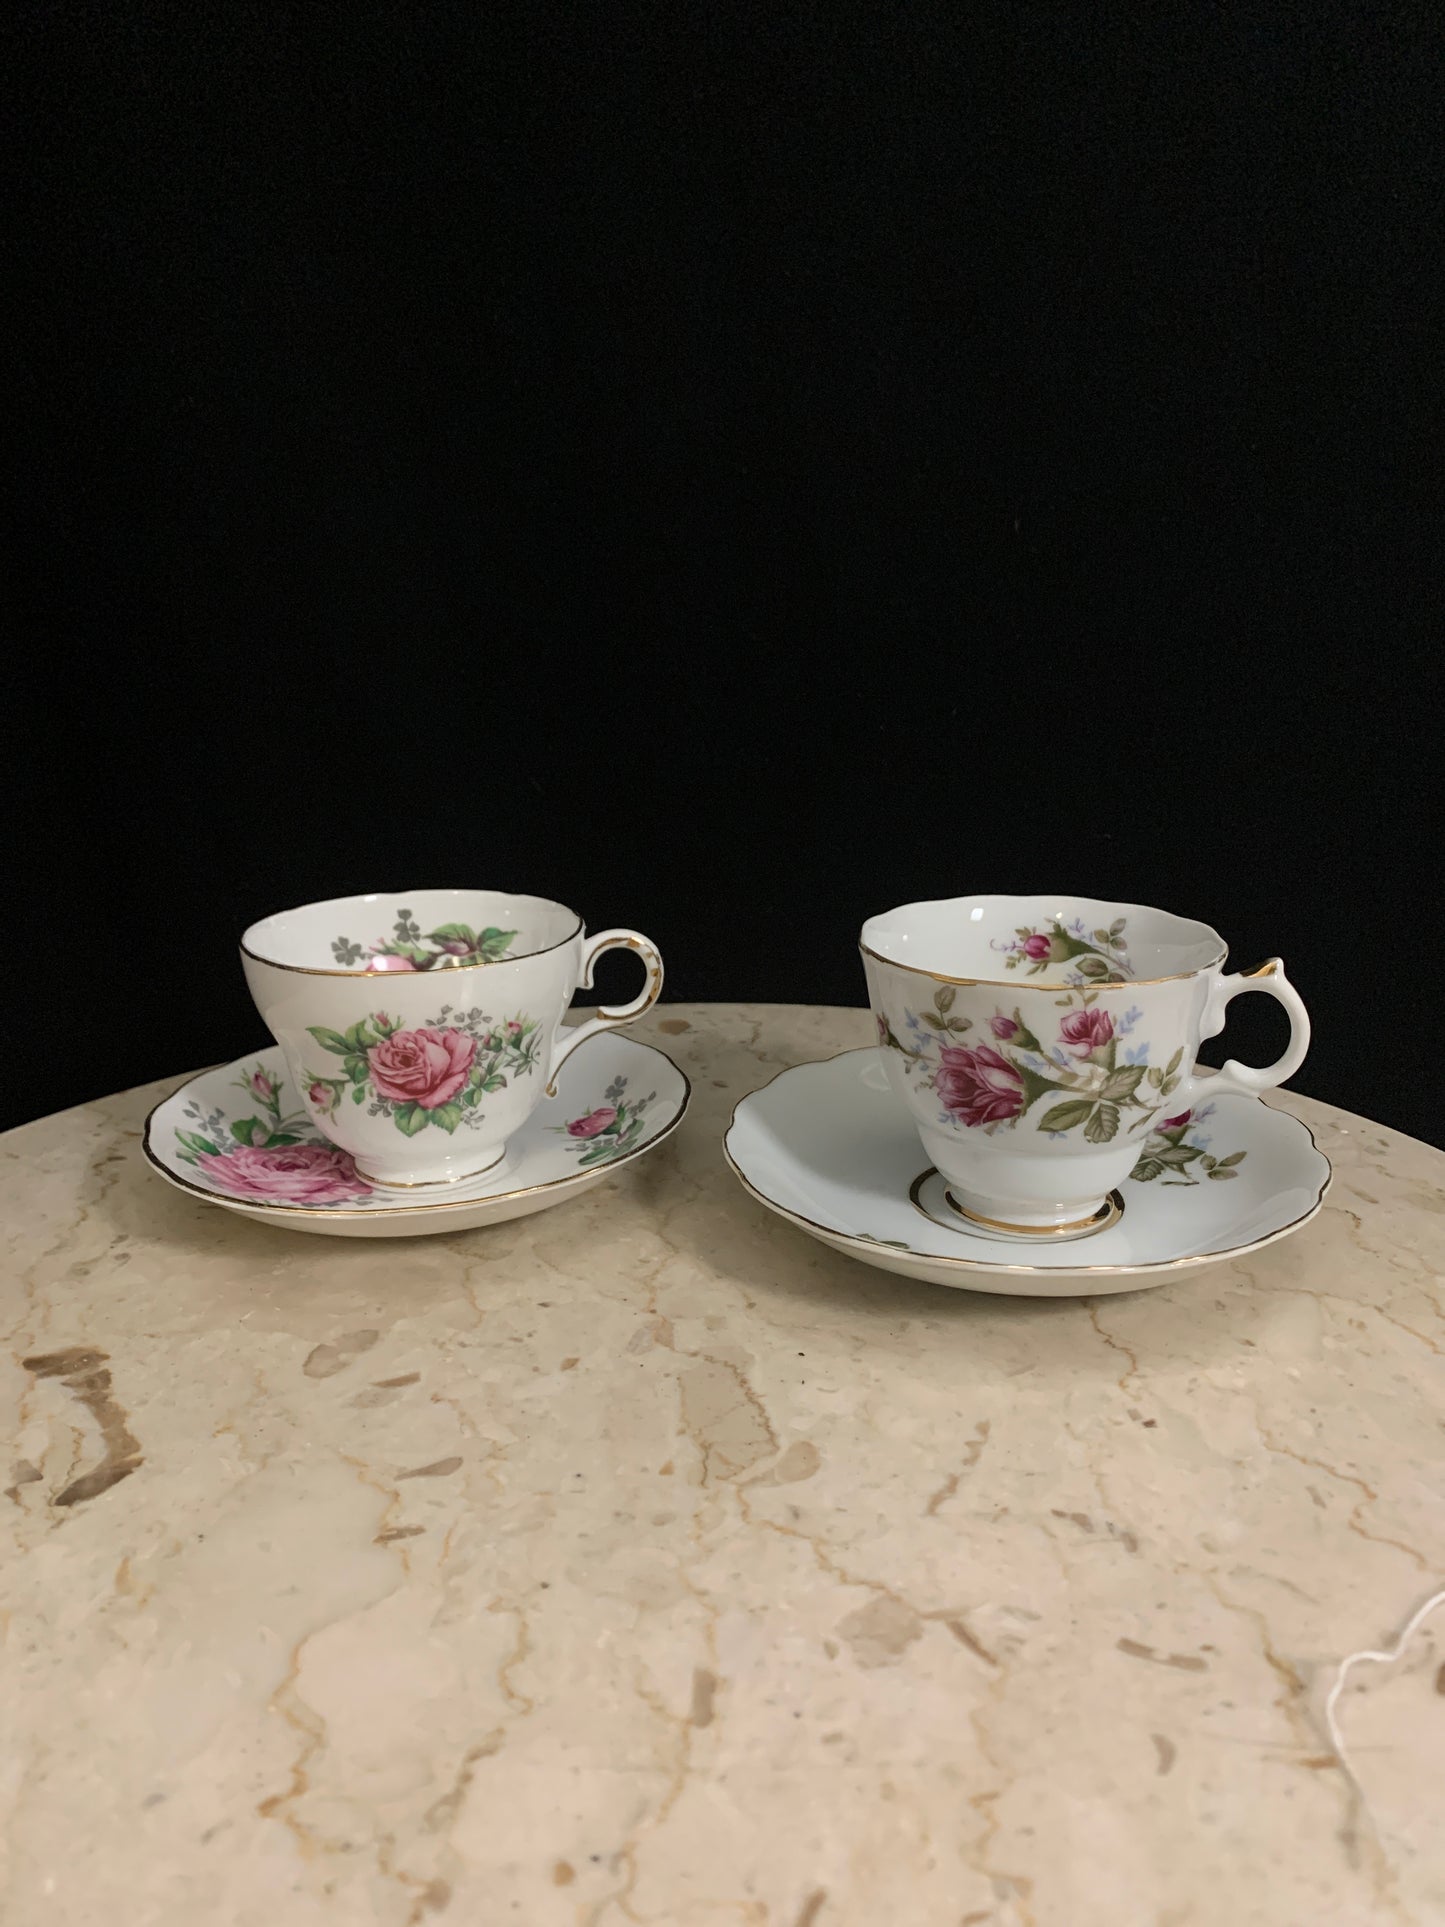 Pair of Mismatched Pink Floral Teacups Tea for Two Teacups with Pink Roses